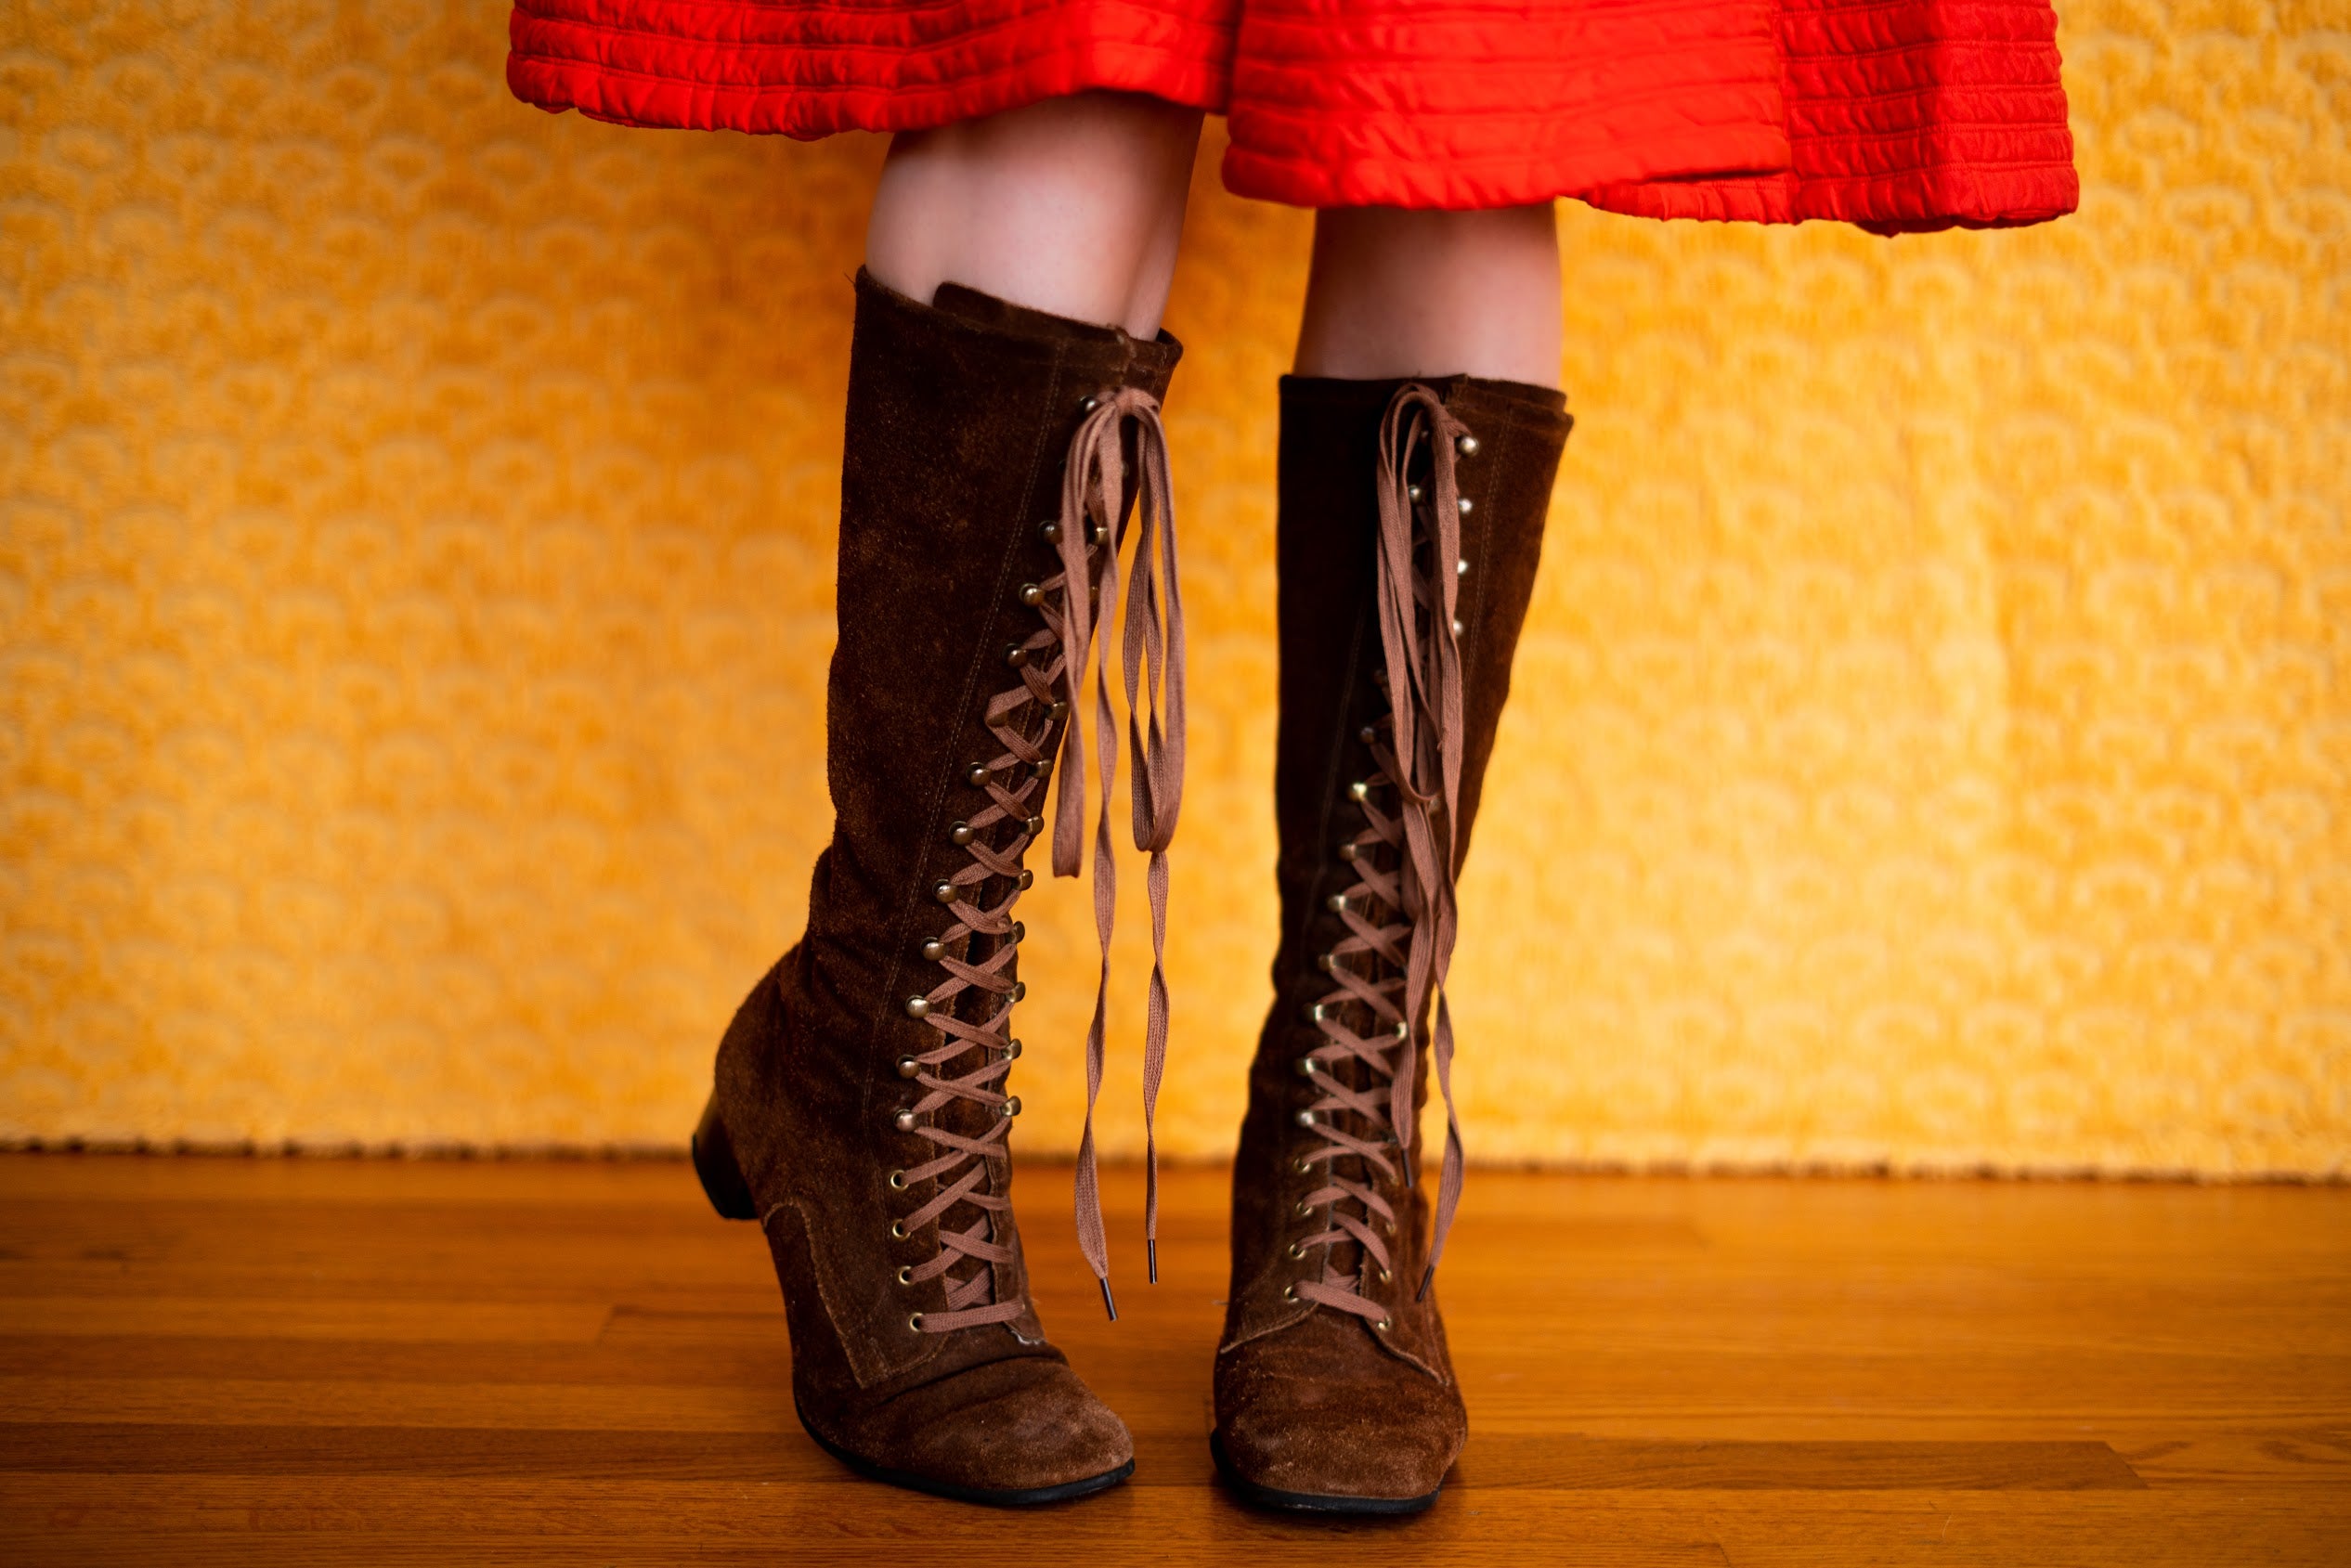 70s Black Leather Lace Up Knee High Boots